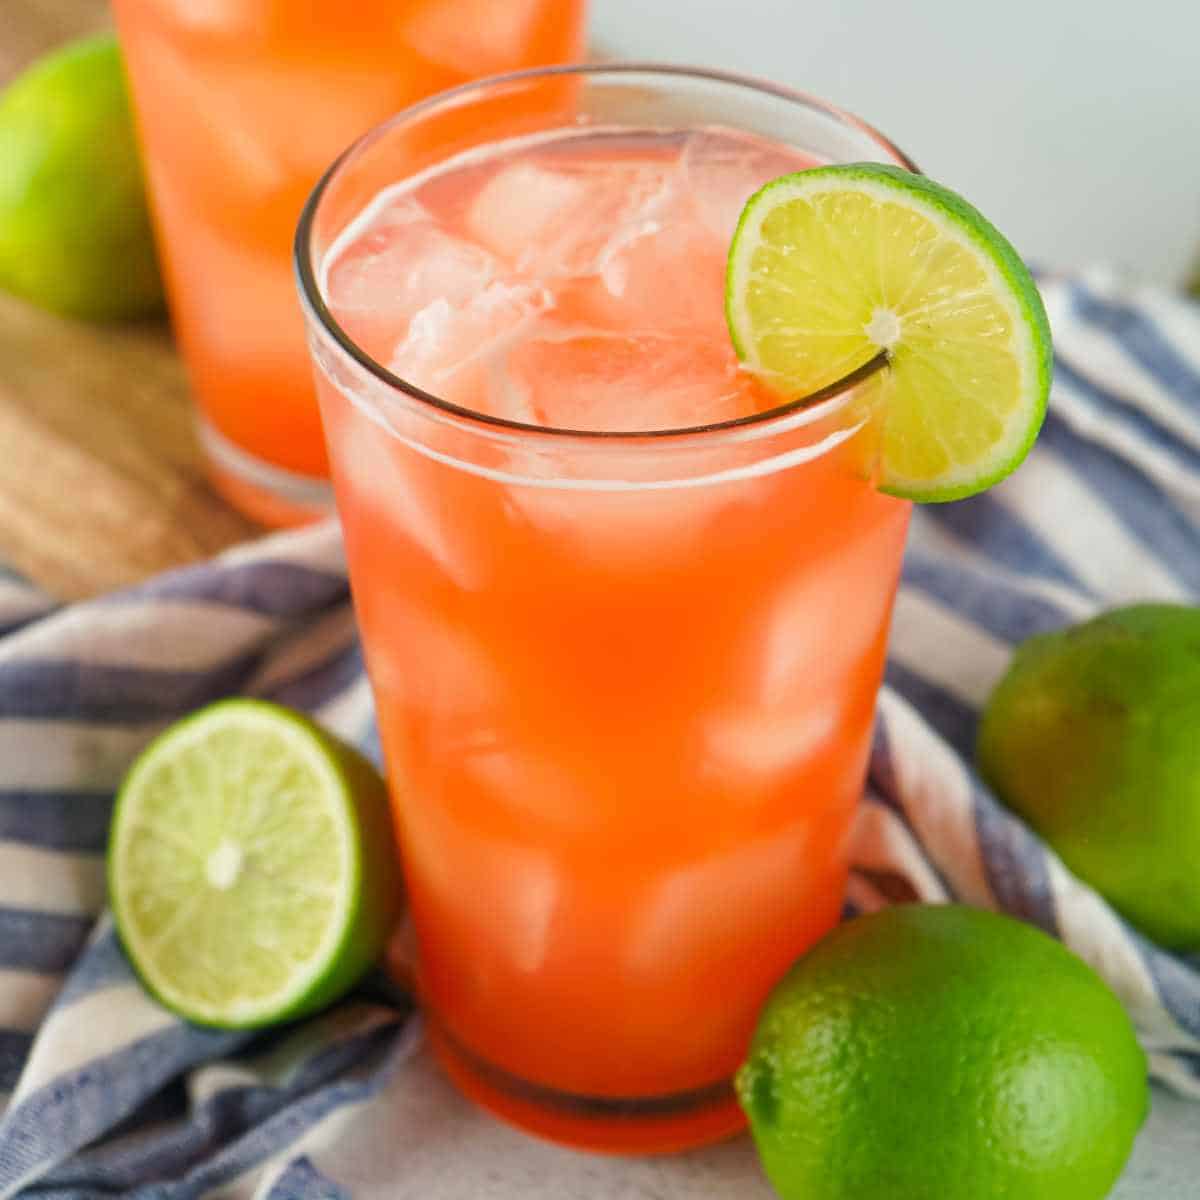 bacardi rum punch in a glass garnished with lime slices.